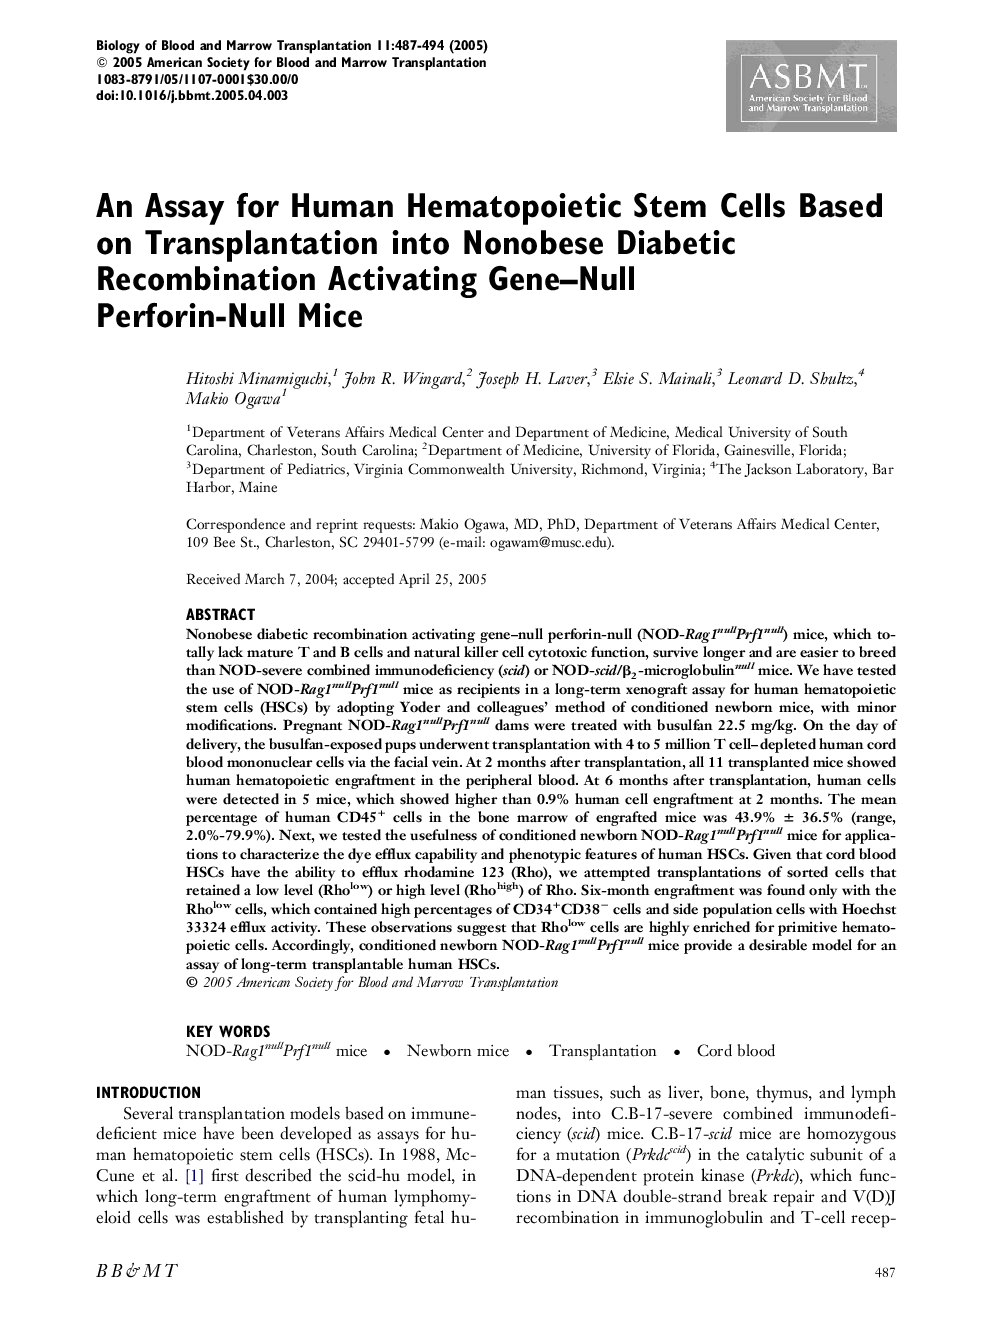 An Assay for Human Hematopoietic Stem Cells Based on Transplantation into Nonobese Diabetic Recombination Activating Gene-Null Perforin-Null Mice